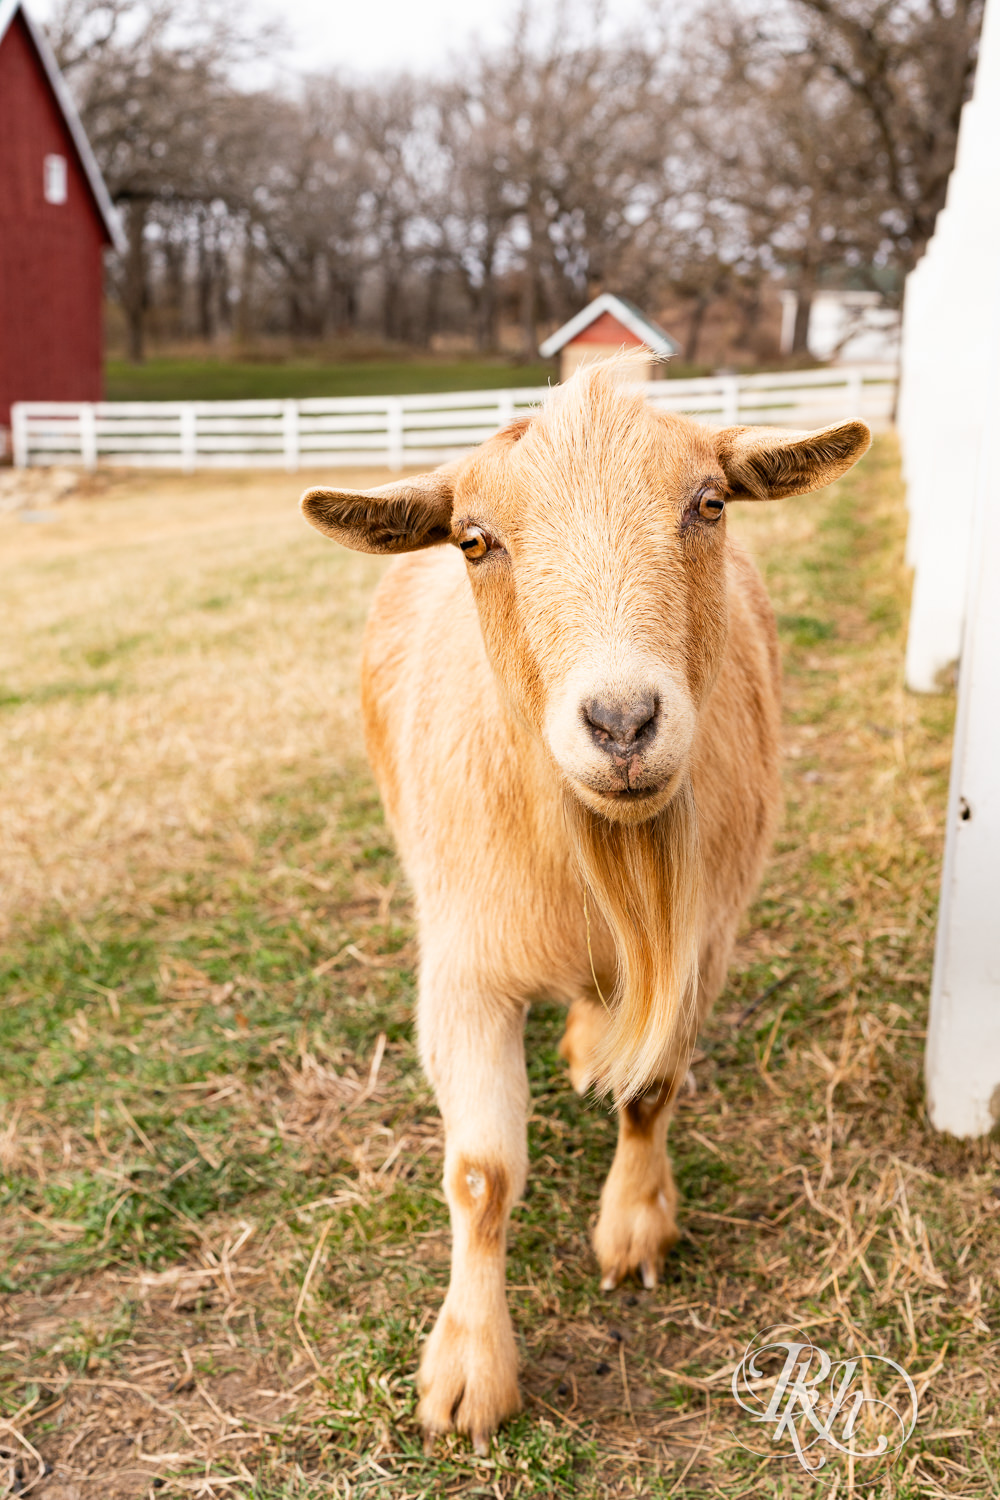 Goats look at camera on wedding day at Almquist Farm in Hastings, Minnesota.